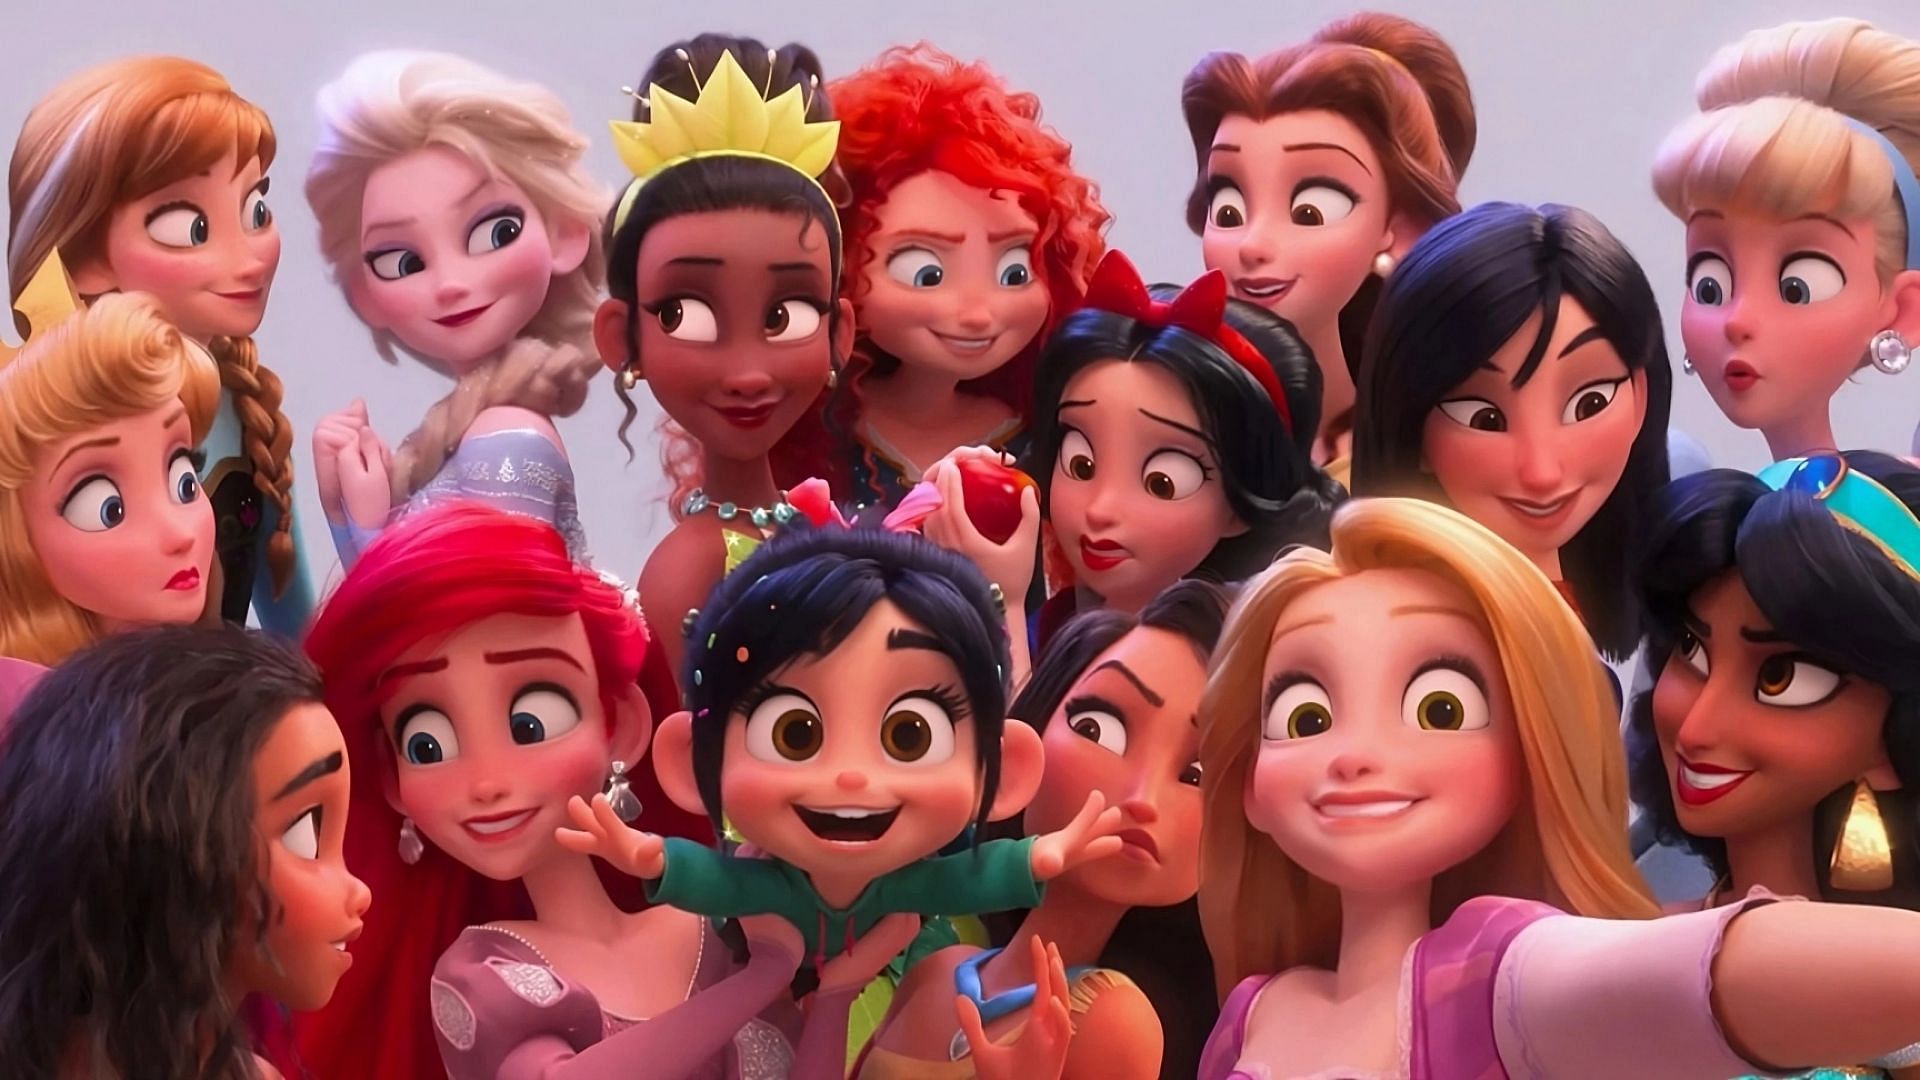 The popularity of princesses of any character can vary over time. (Image via Walt Disney Animation Studios)